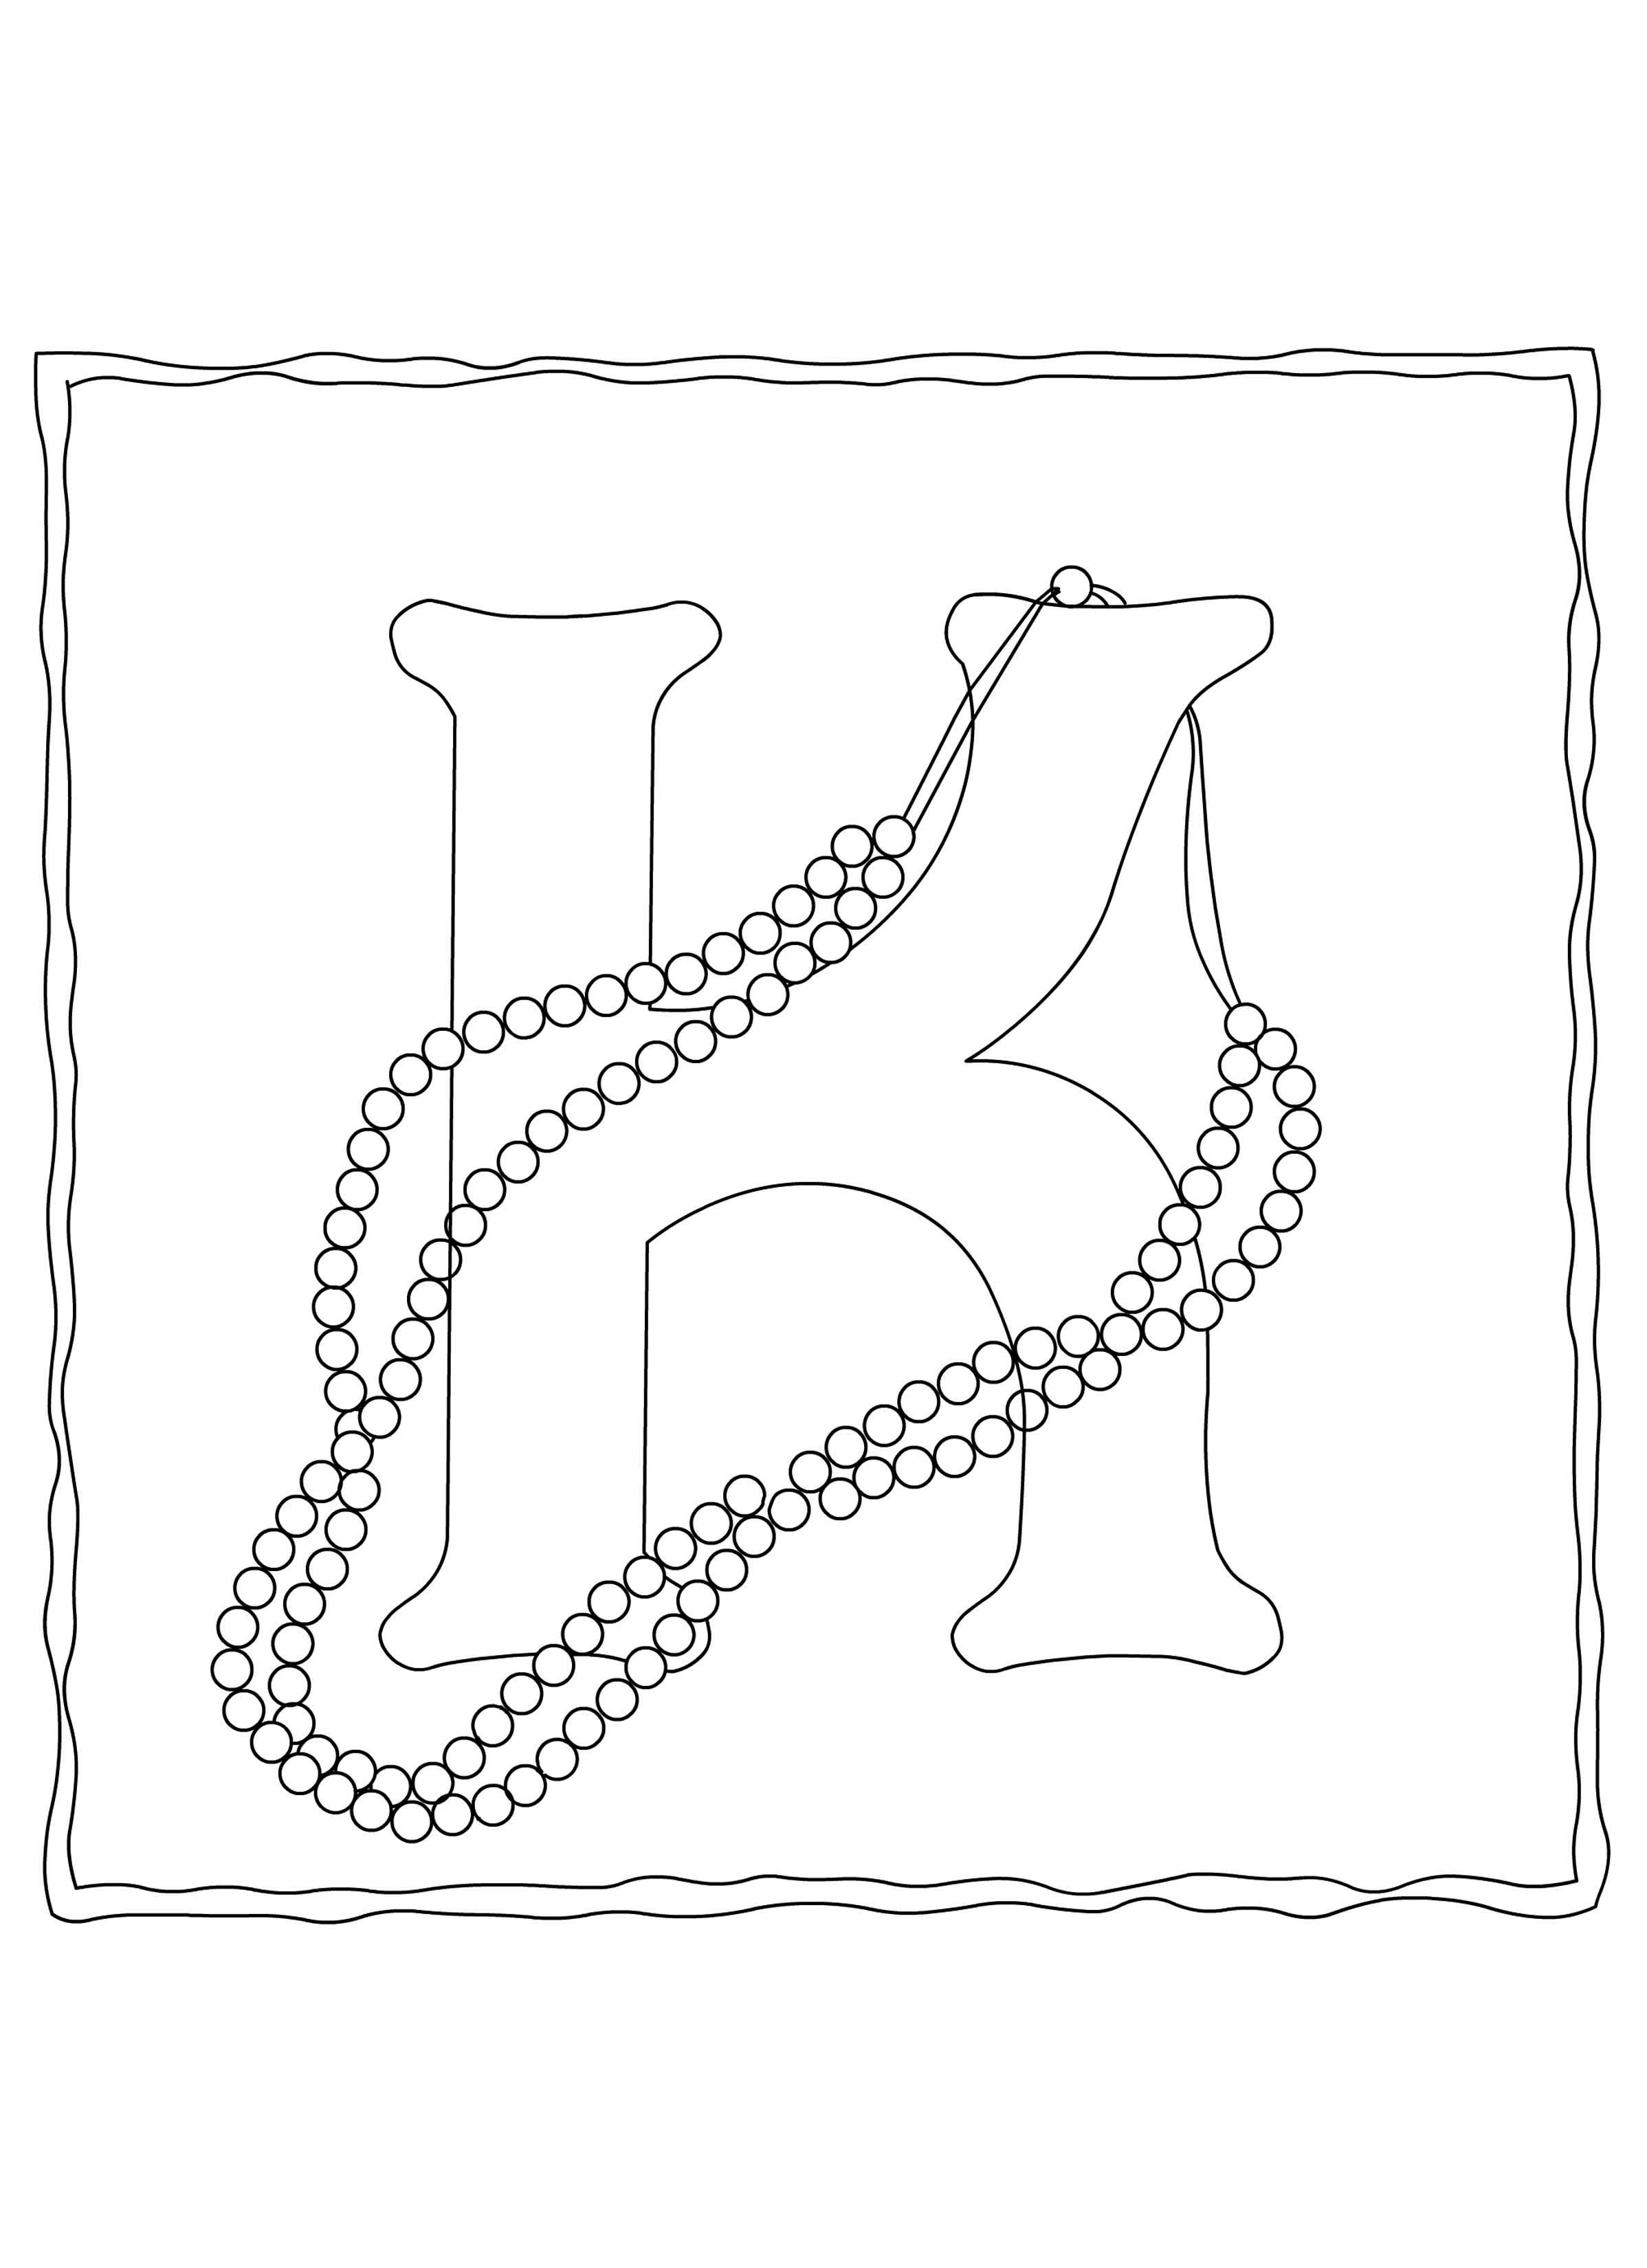 730 Gujarati Alphabet Coloring Pages Pictures